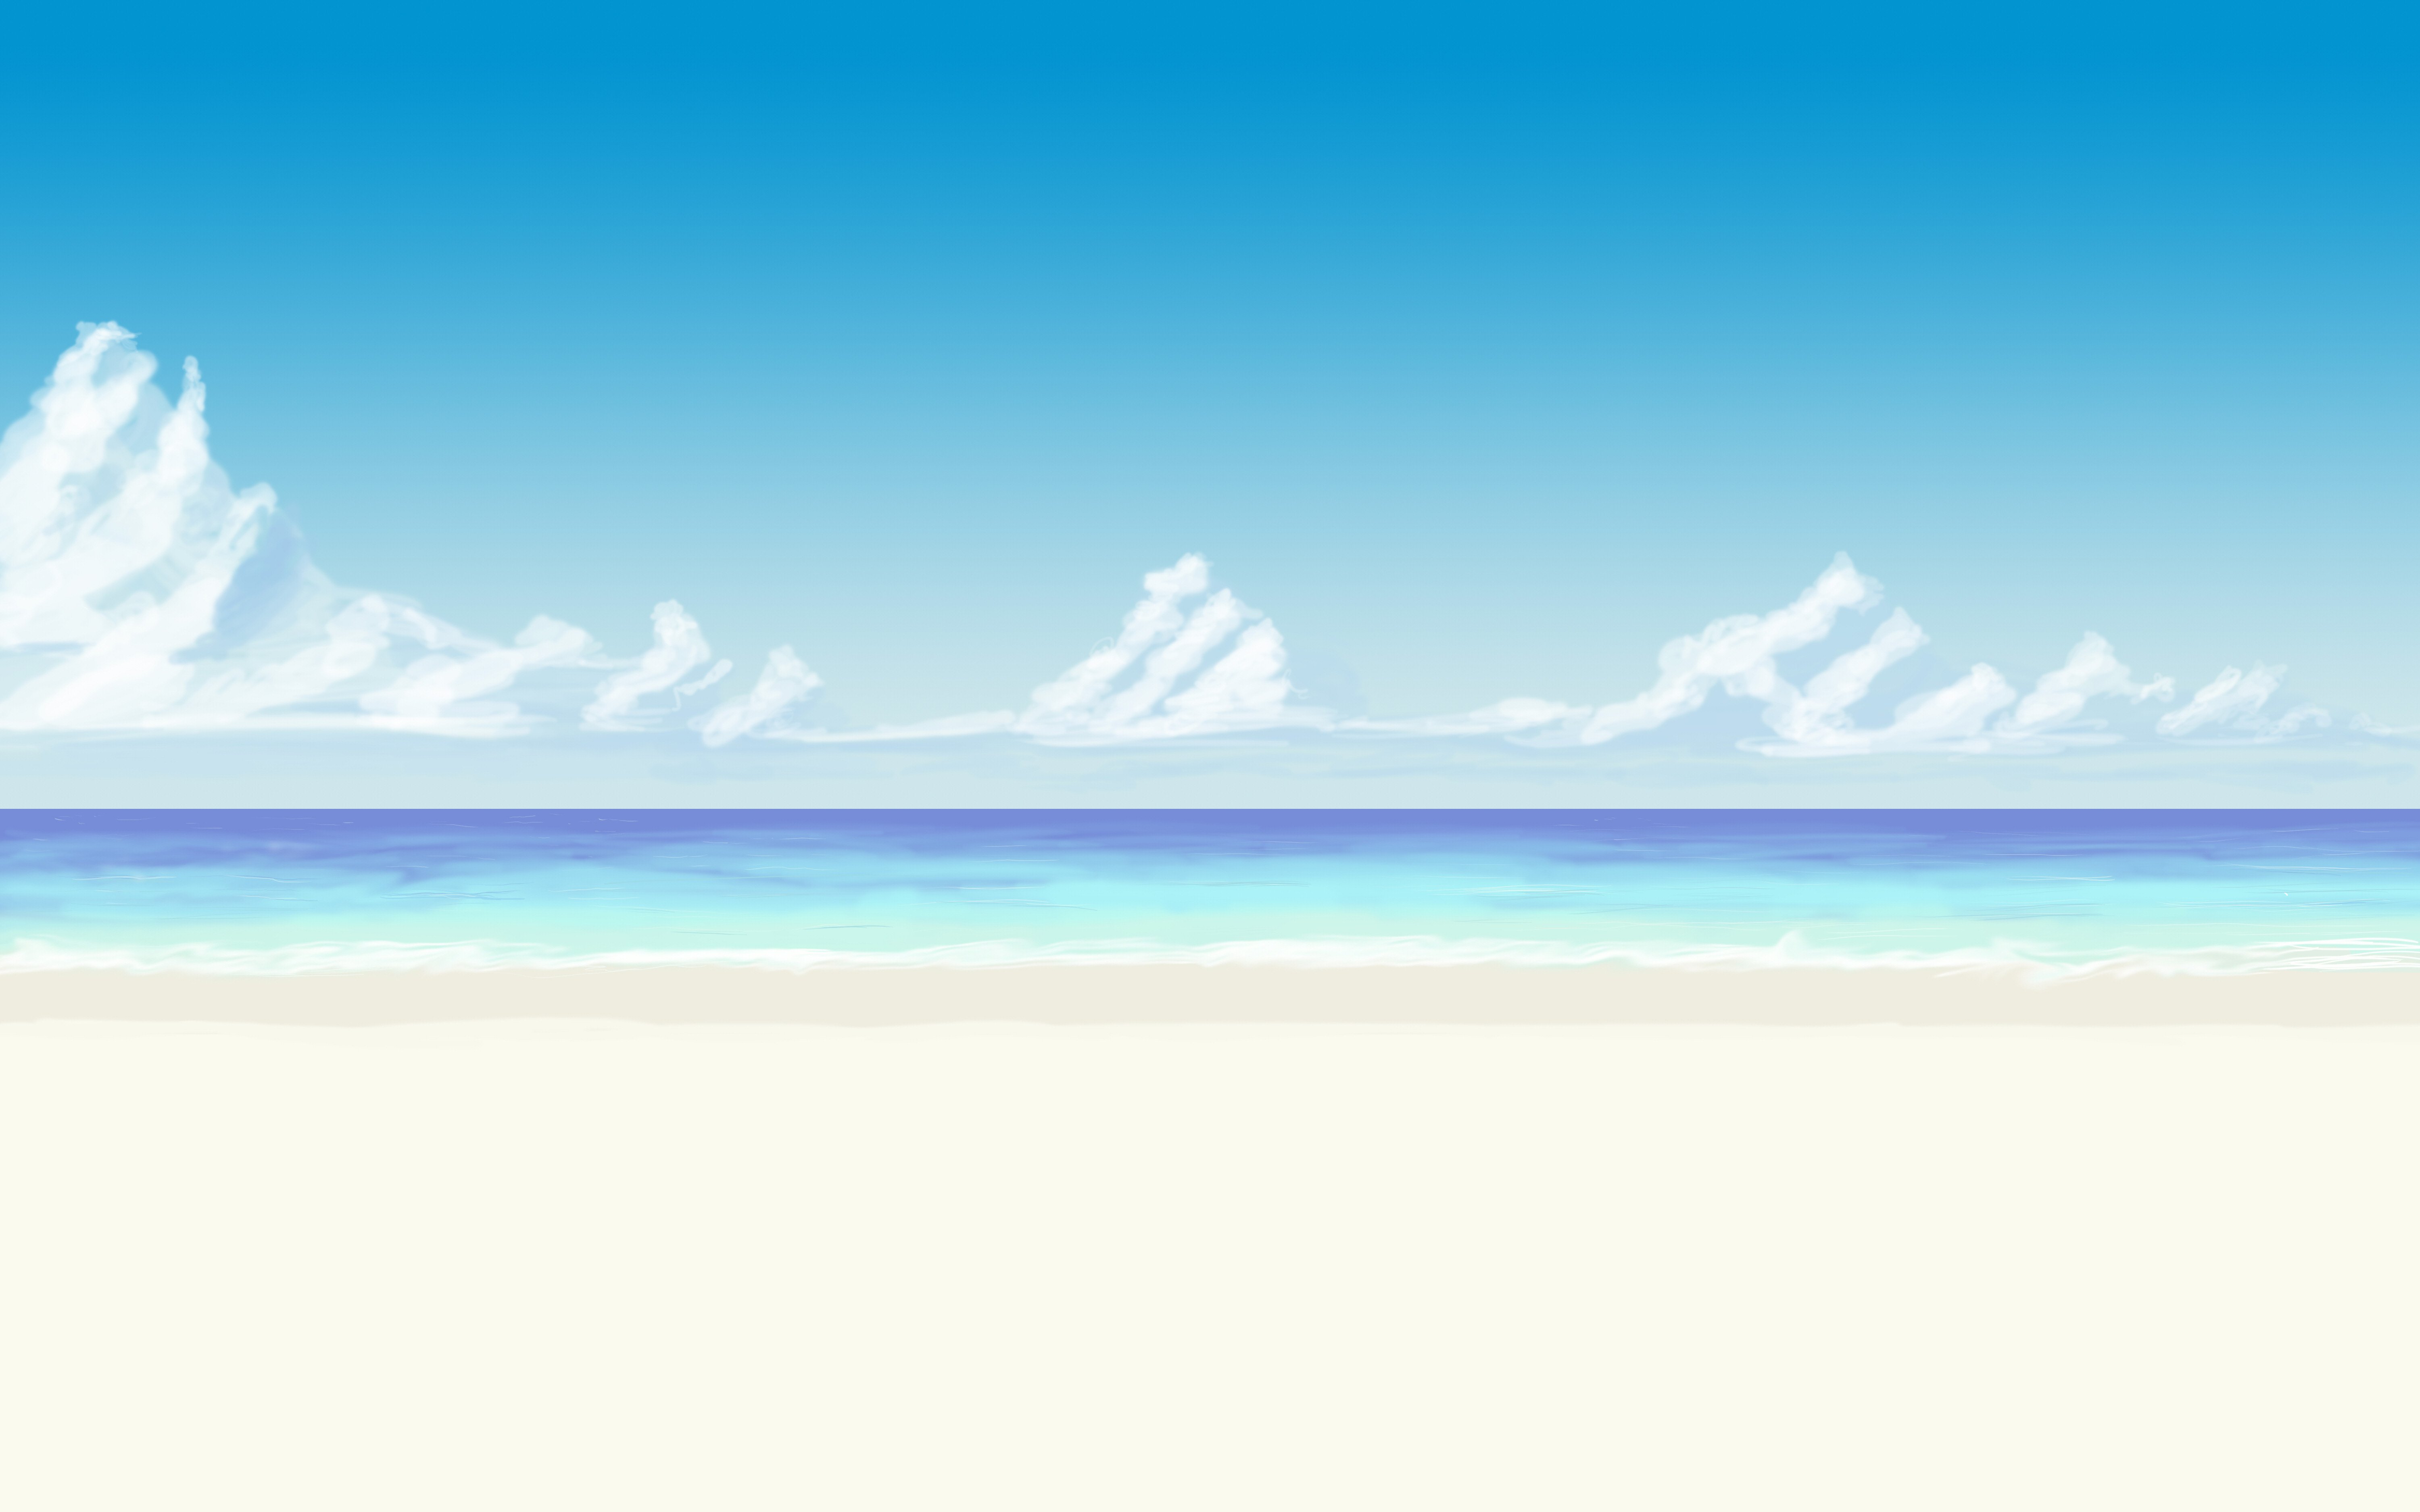 Another Anime Beach Background by wbd on